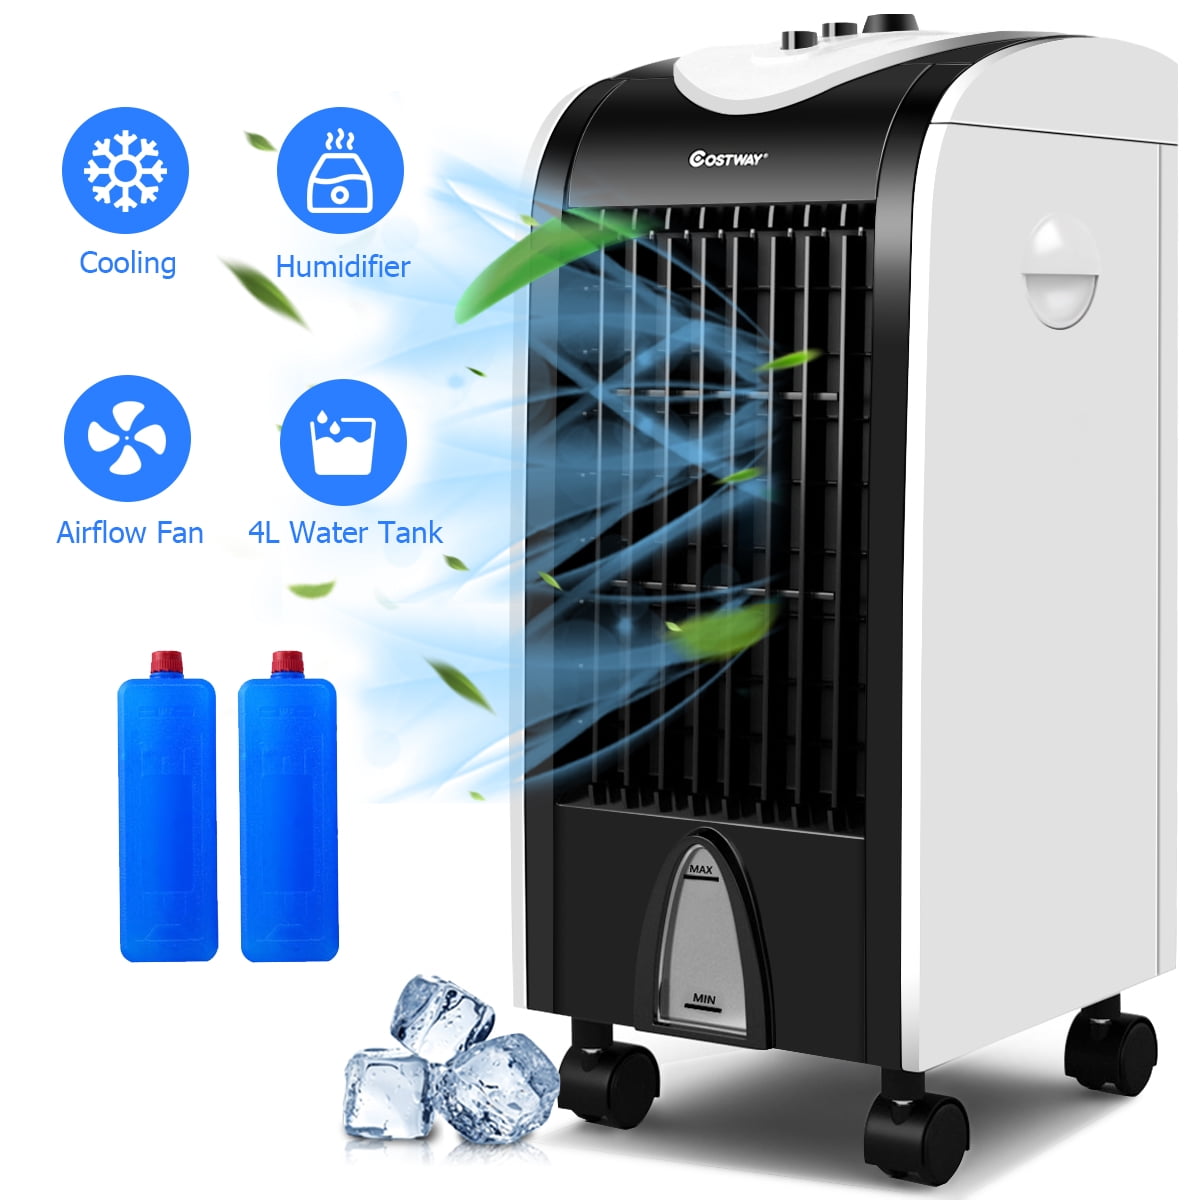 Portable Air Conditioner Cooler Fan Humidifier Purifier Air Cooling Cool Home US 